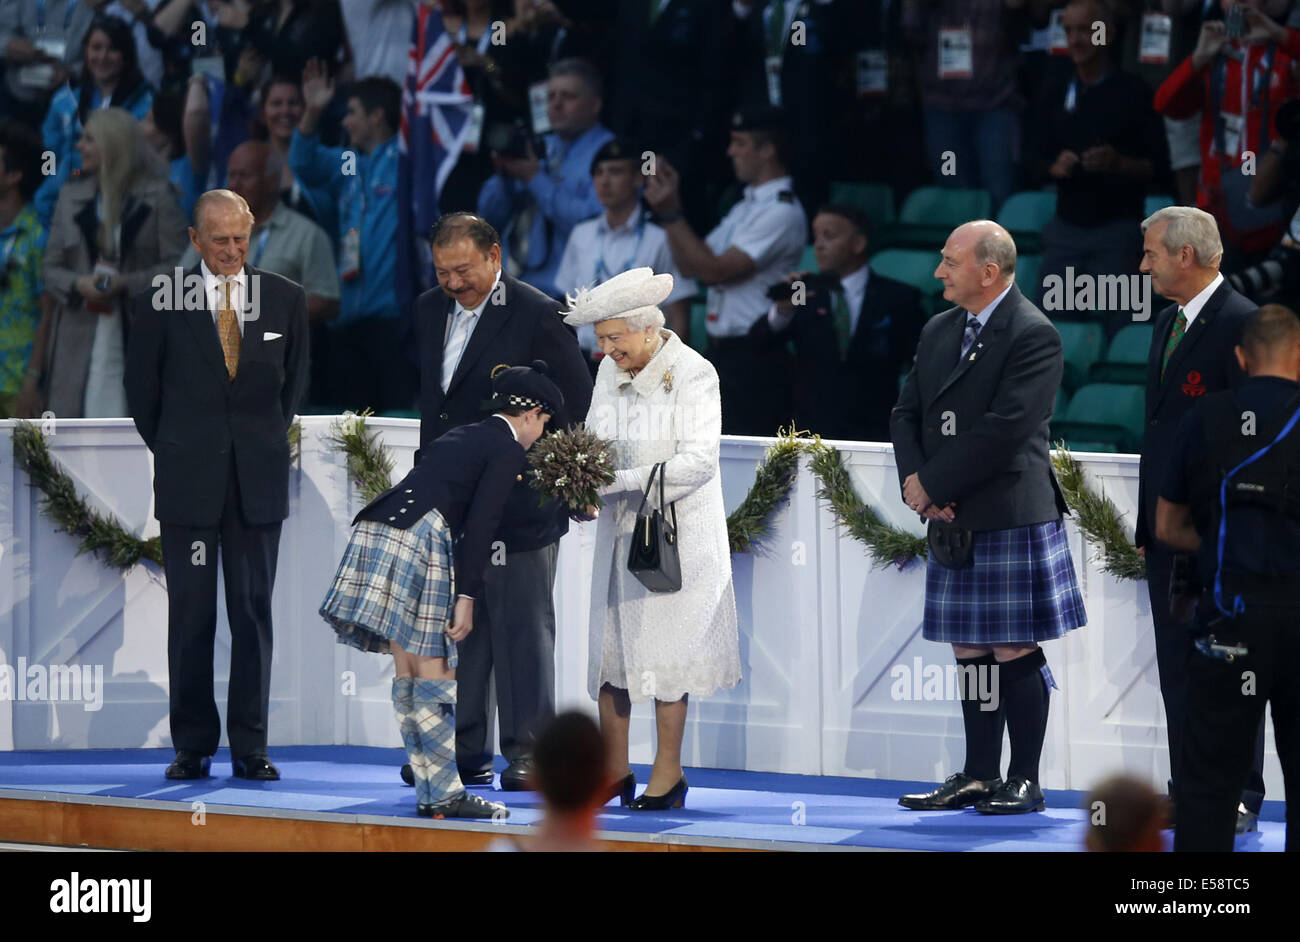 Glasgow, Scotland, UK. 23rd July, 2014. Britain's Queen Elizabeth II receives flowers from a child during the opening ceremony of the XX Commonwealth Games at the Celtic Park in Glasgow July 23, 2014. Credit:  Wang Lili/Xinhua/Alamy Live News Stock Photo